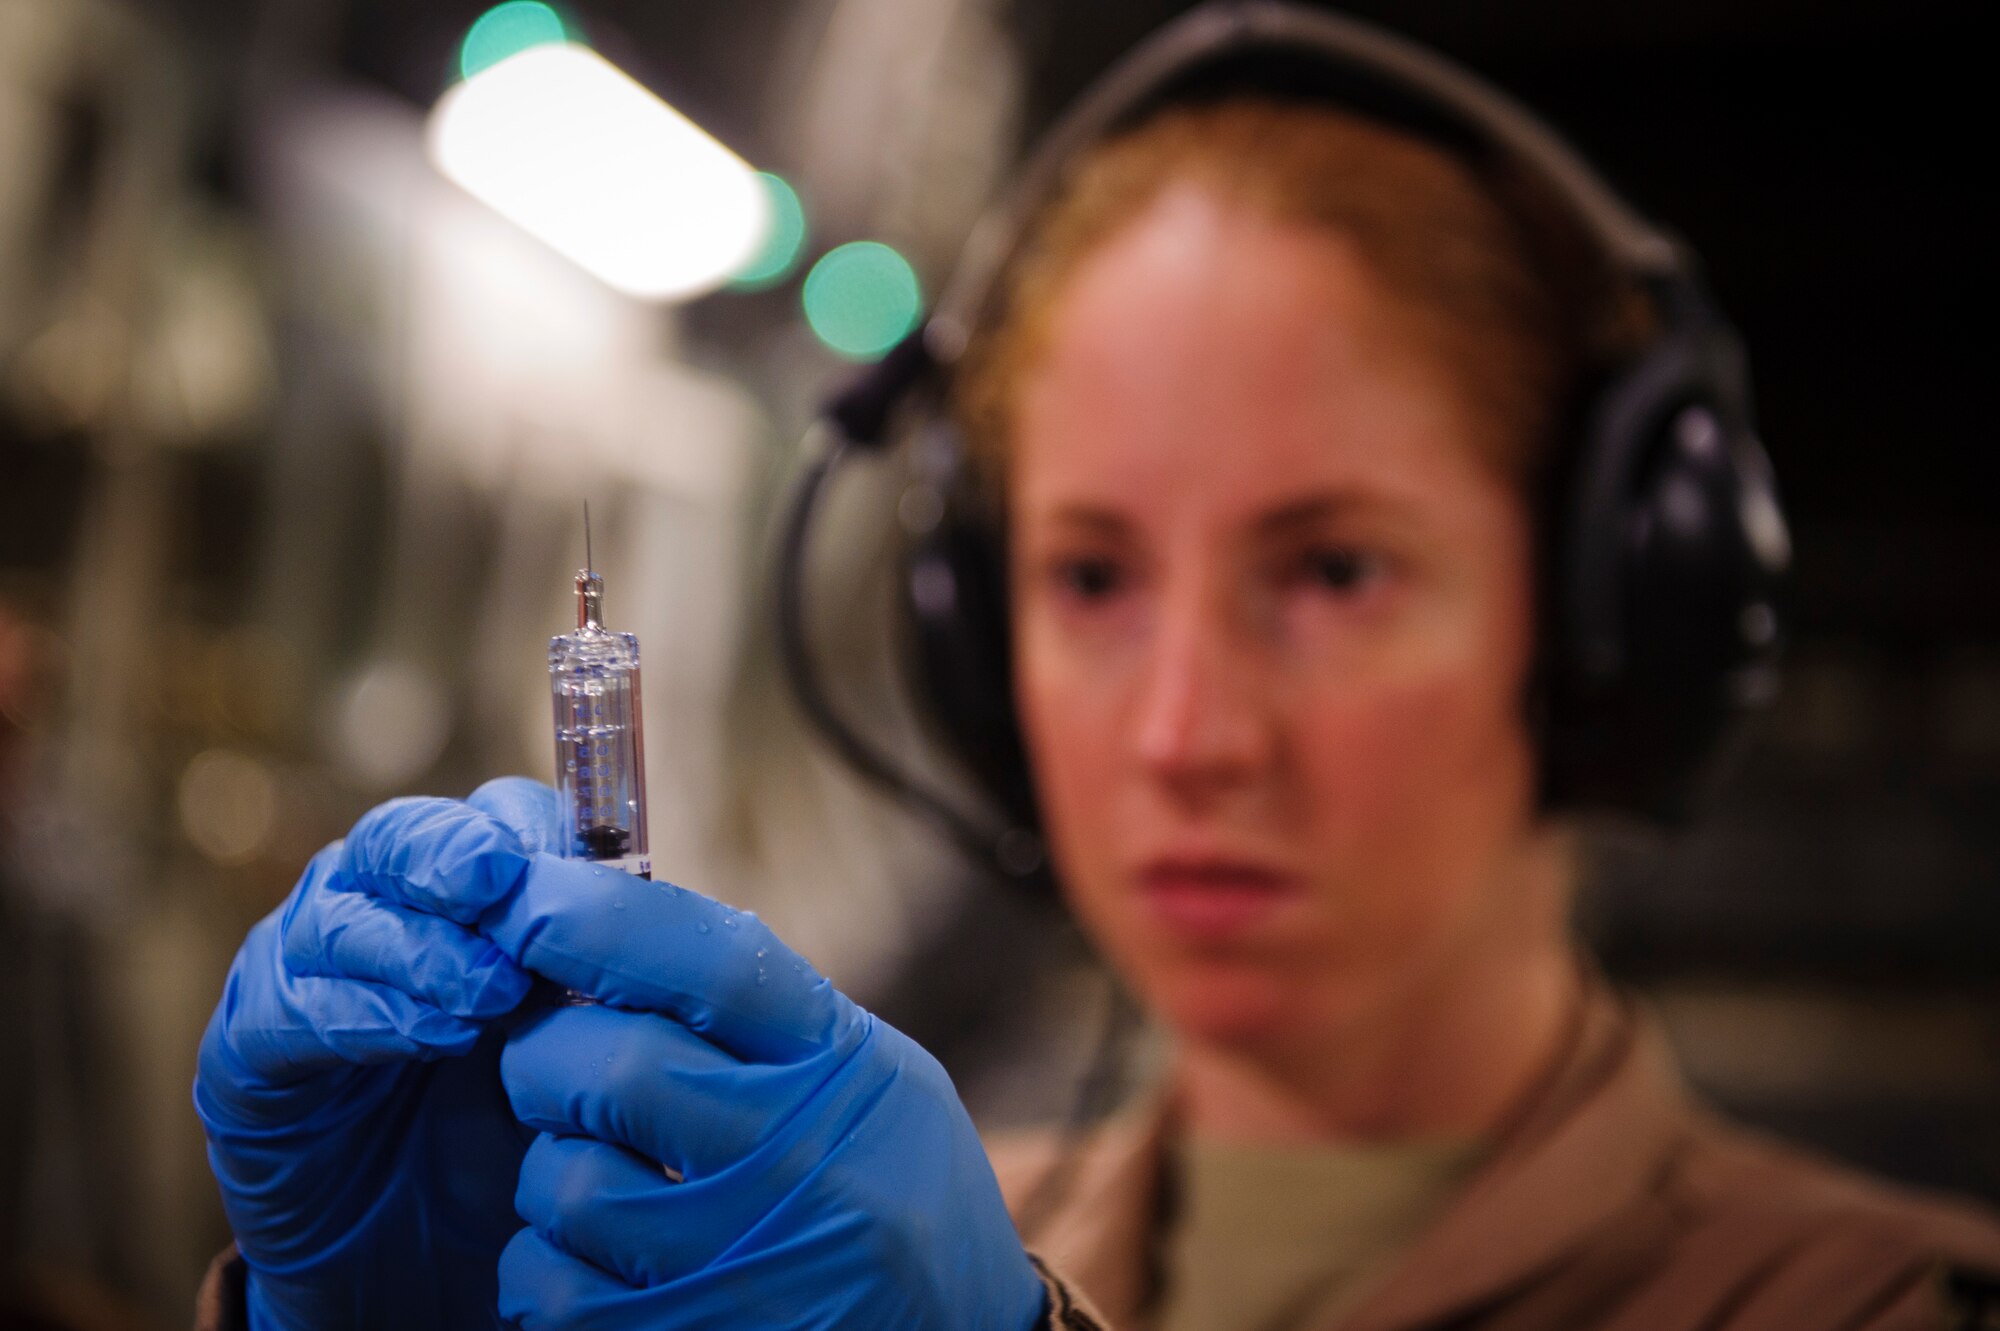 SOUTHWEST ASIA – Capt. Jennifer Williams, 379th Expeditionary Aeromedical Evacuation Squadron nurse, measures fluid for an injection for a patient during an evacuation flight to Landstuhl Regional Medical Center, Germany, April 25, 2012. (U.S. Air Force photo/Staff Sgt. Nathanael Callon)